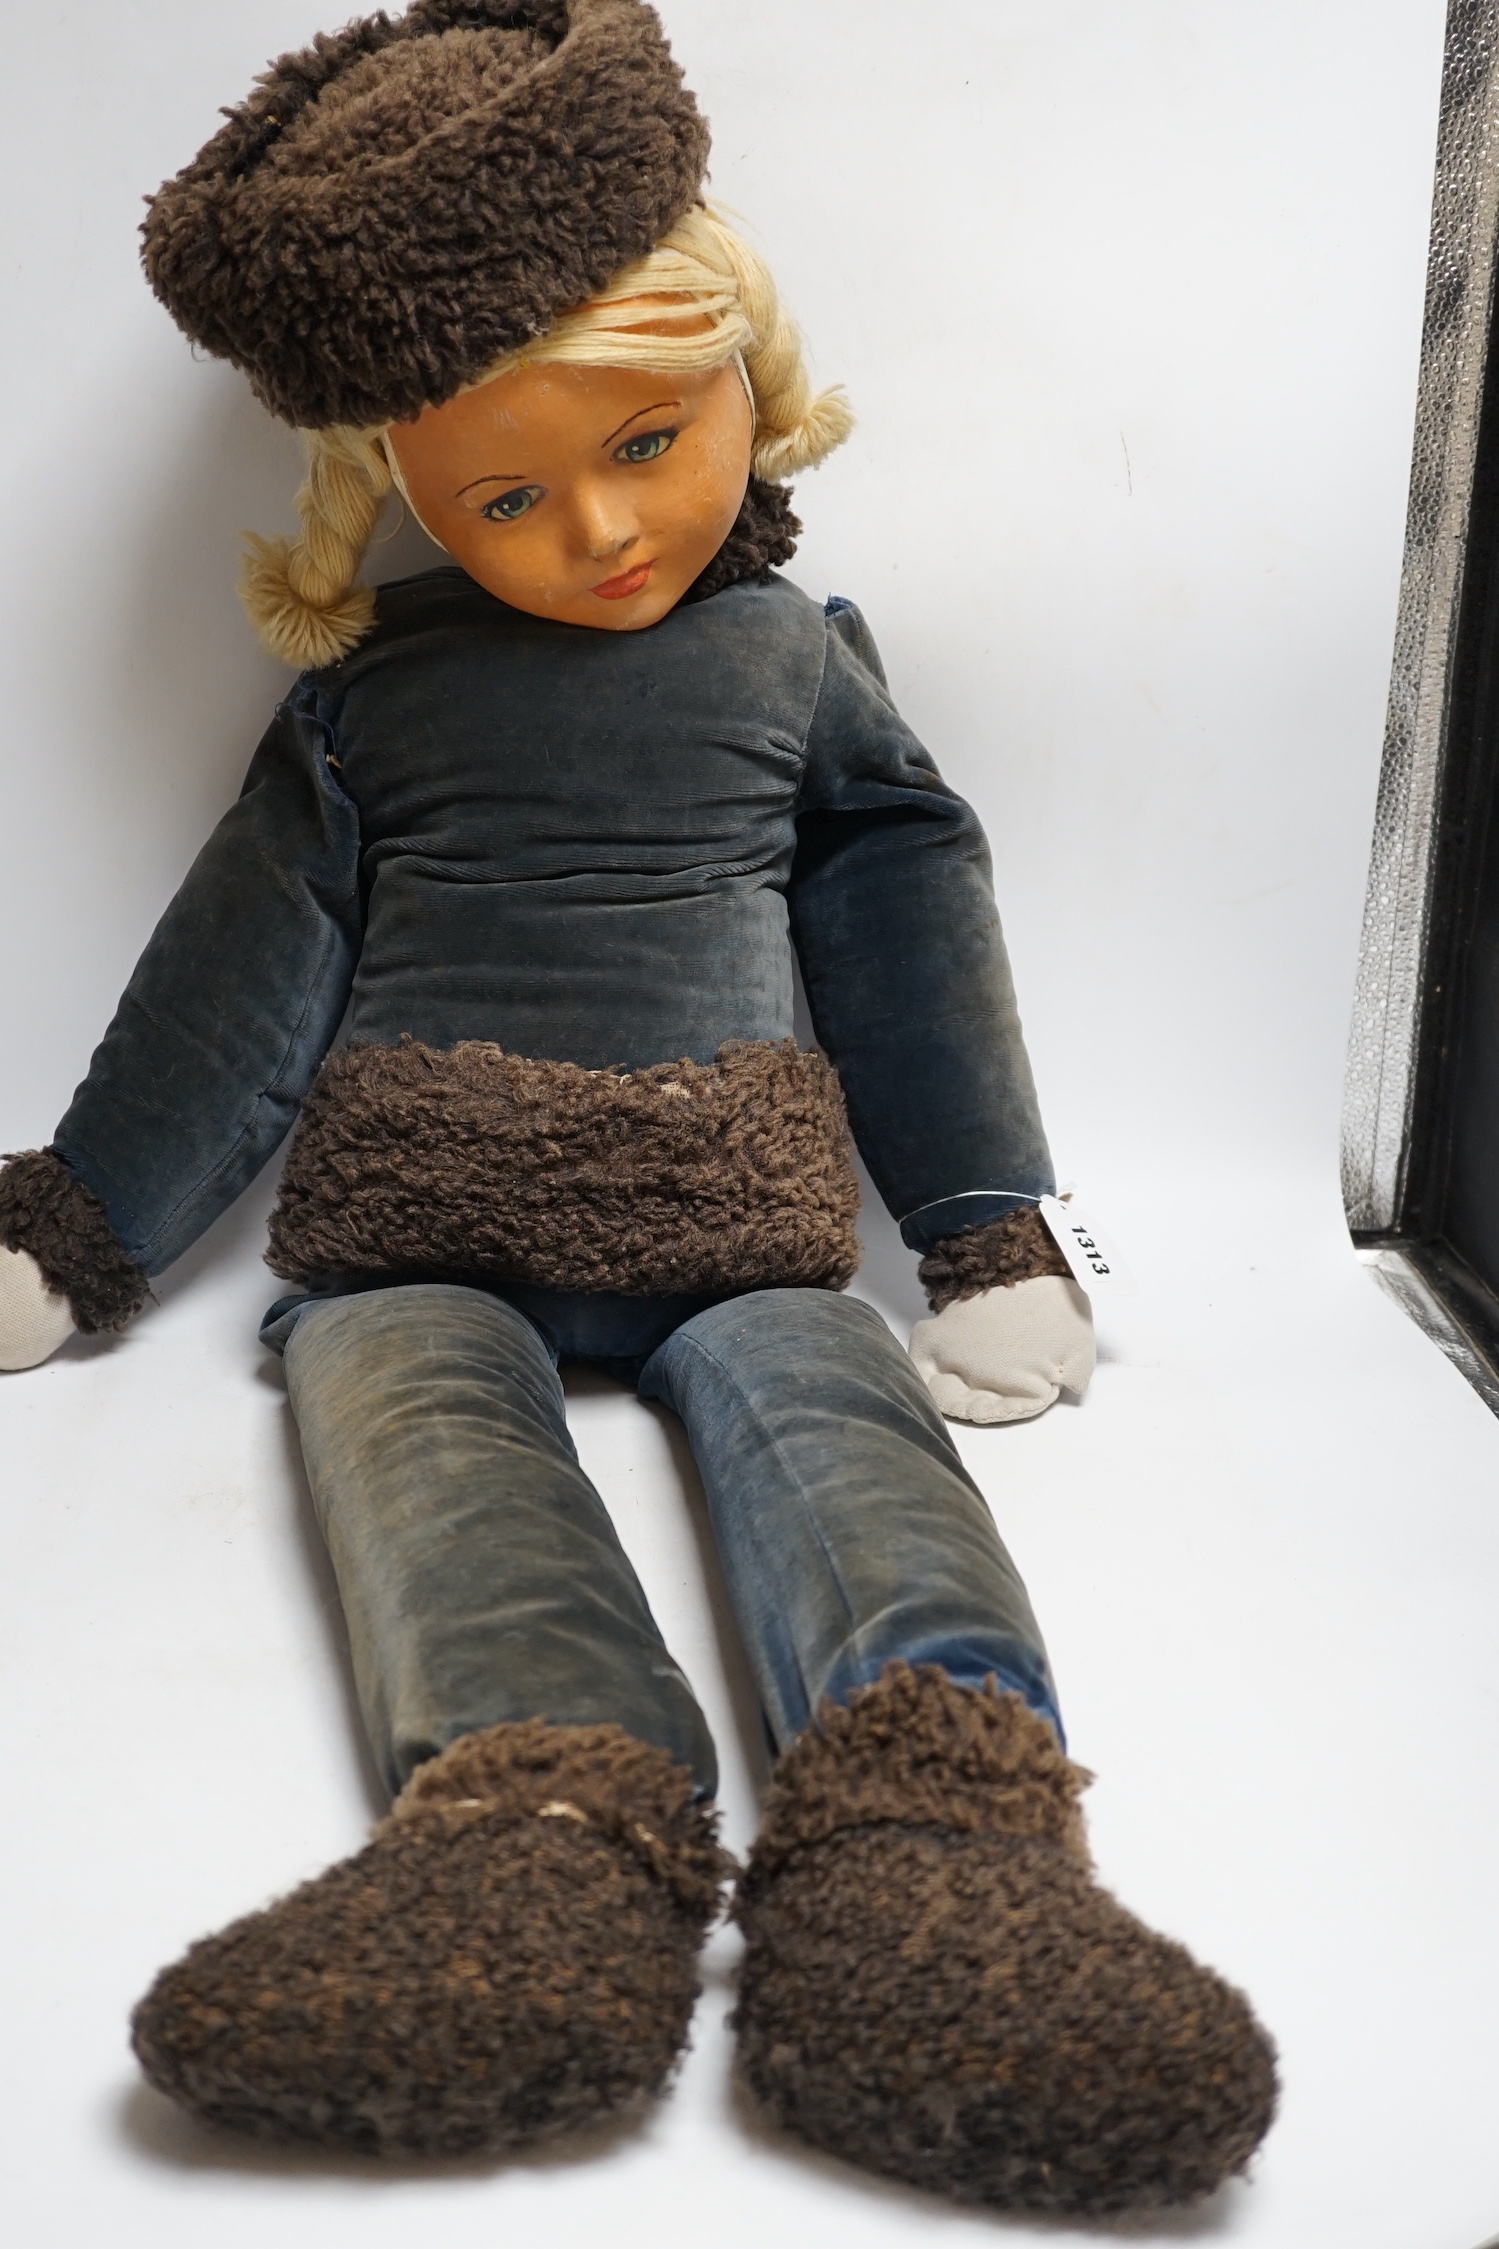 A large Dean's Ragbook cloth doll, circa 1937, Sonja Henie. Some slight rubbing on face, one arm loose, costume all original but faded 112cm